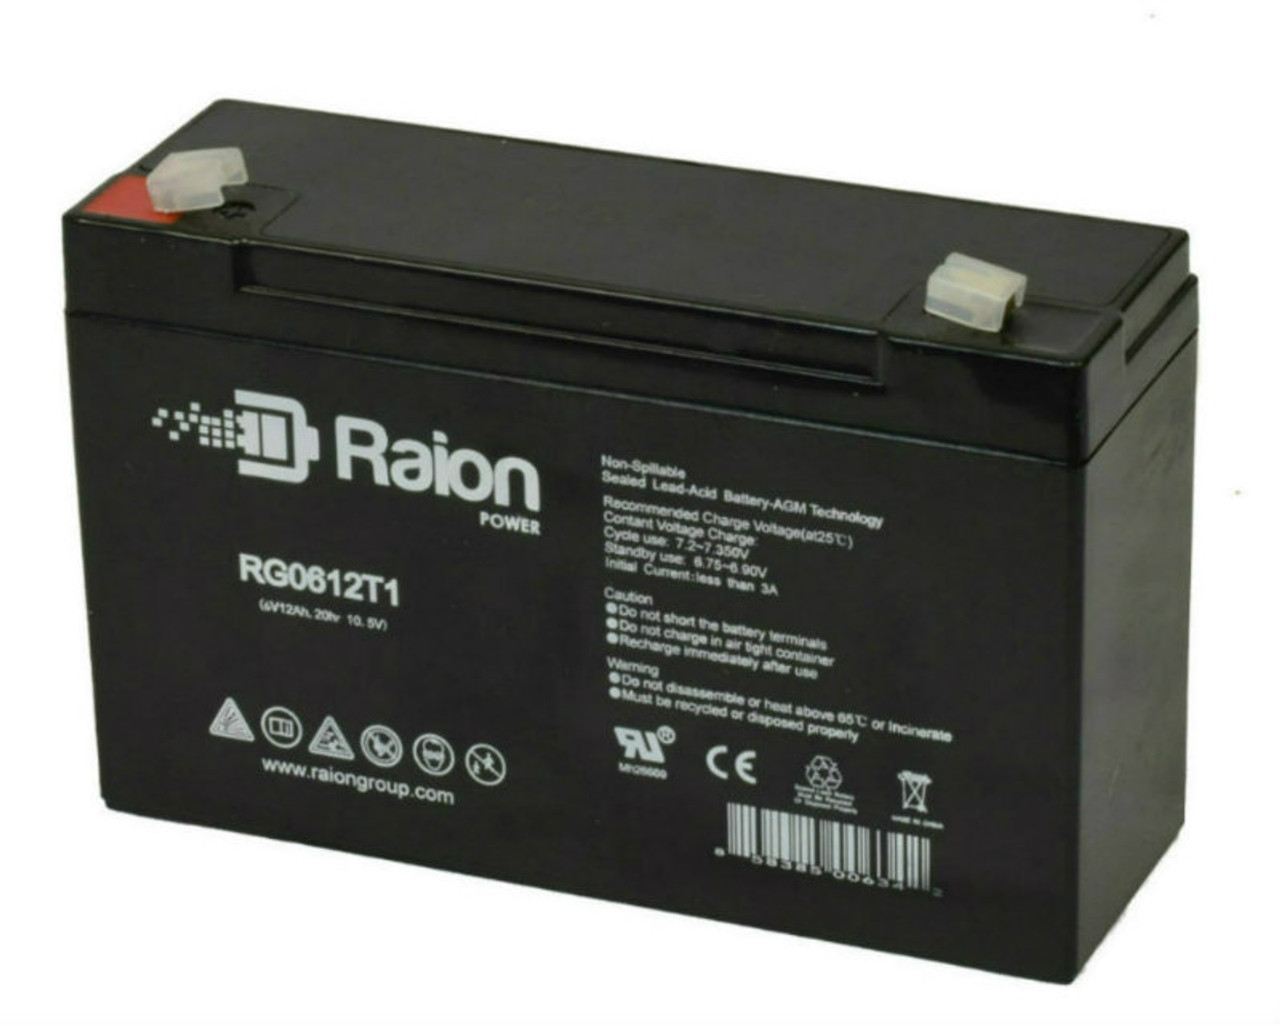 Raion Power RG06120T1 Replacement Emergency Light Battery for Hubbell 12-533/12-534